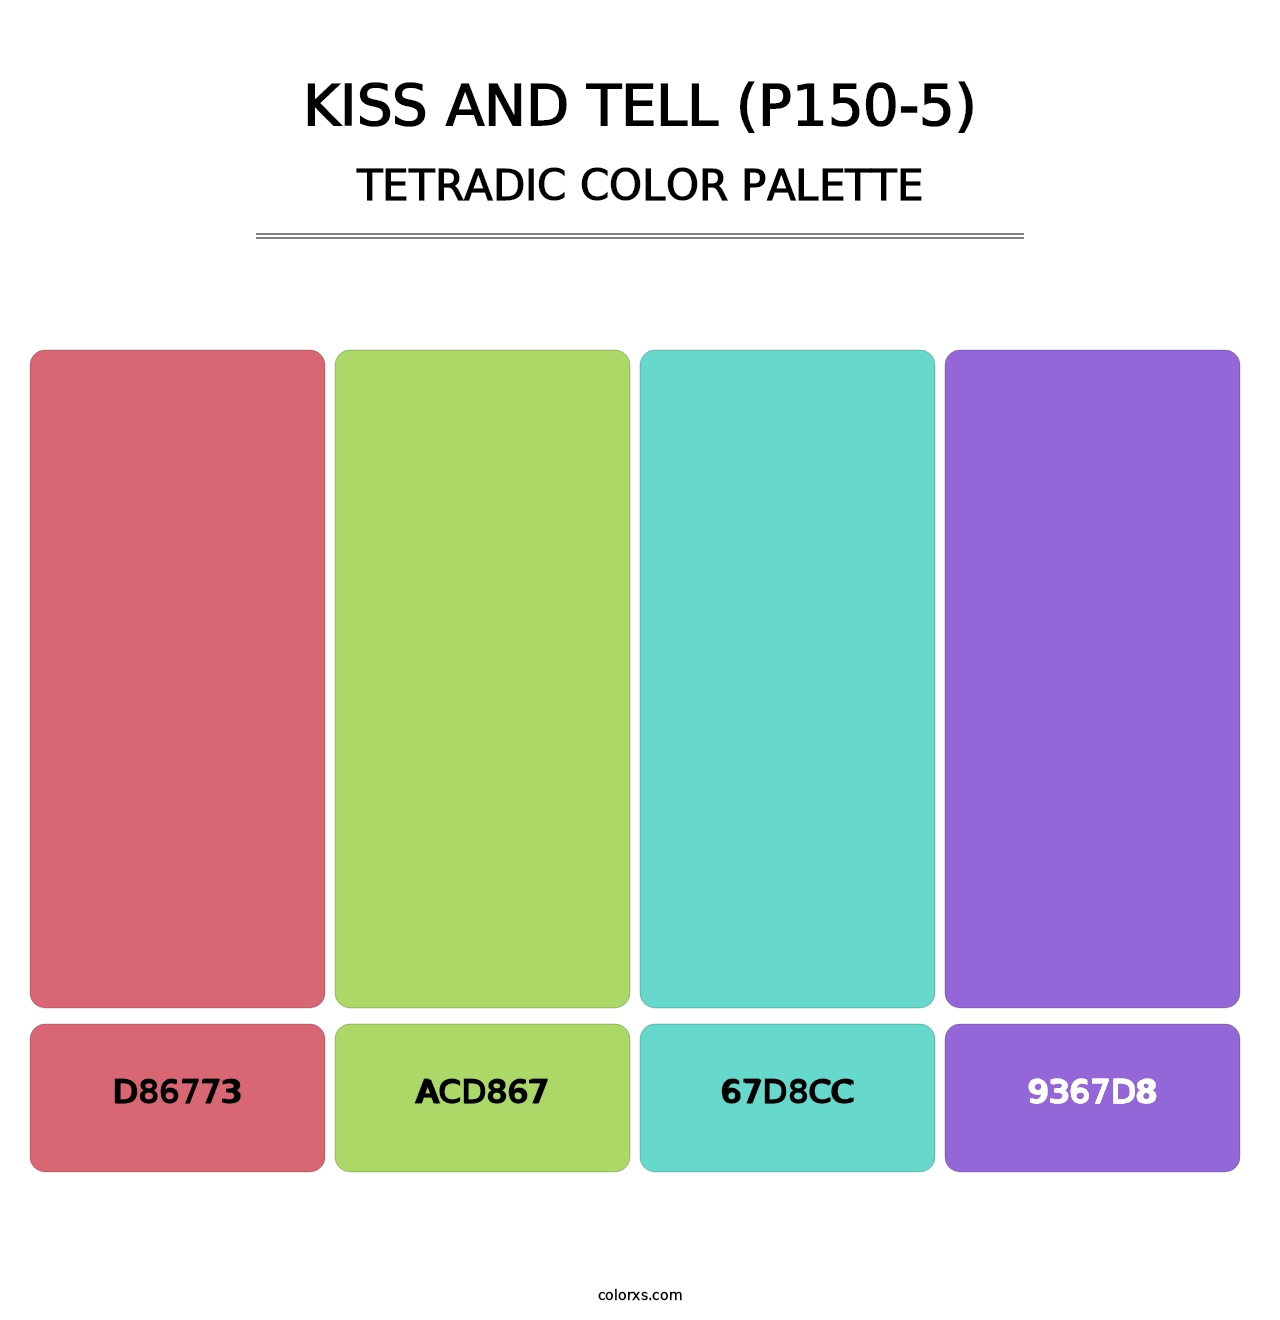 Kiss And Tell (P150-5) - Tetradic Color Palette